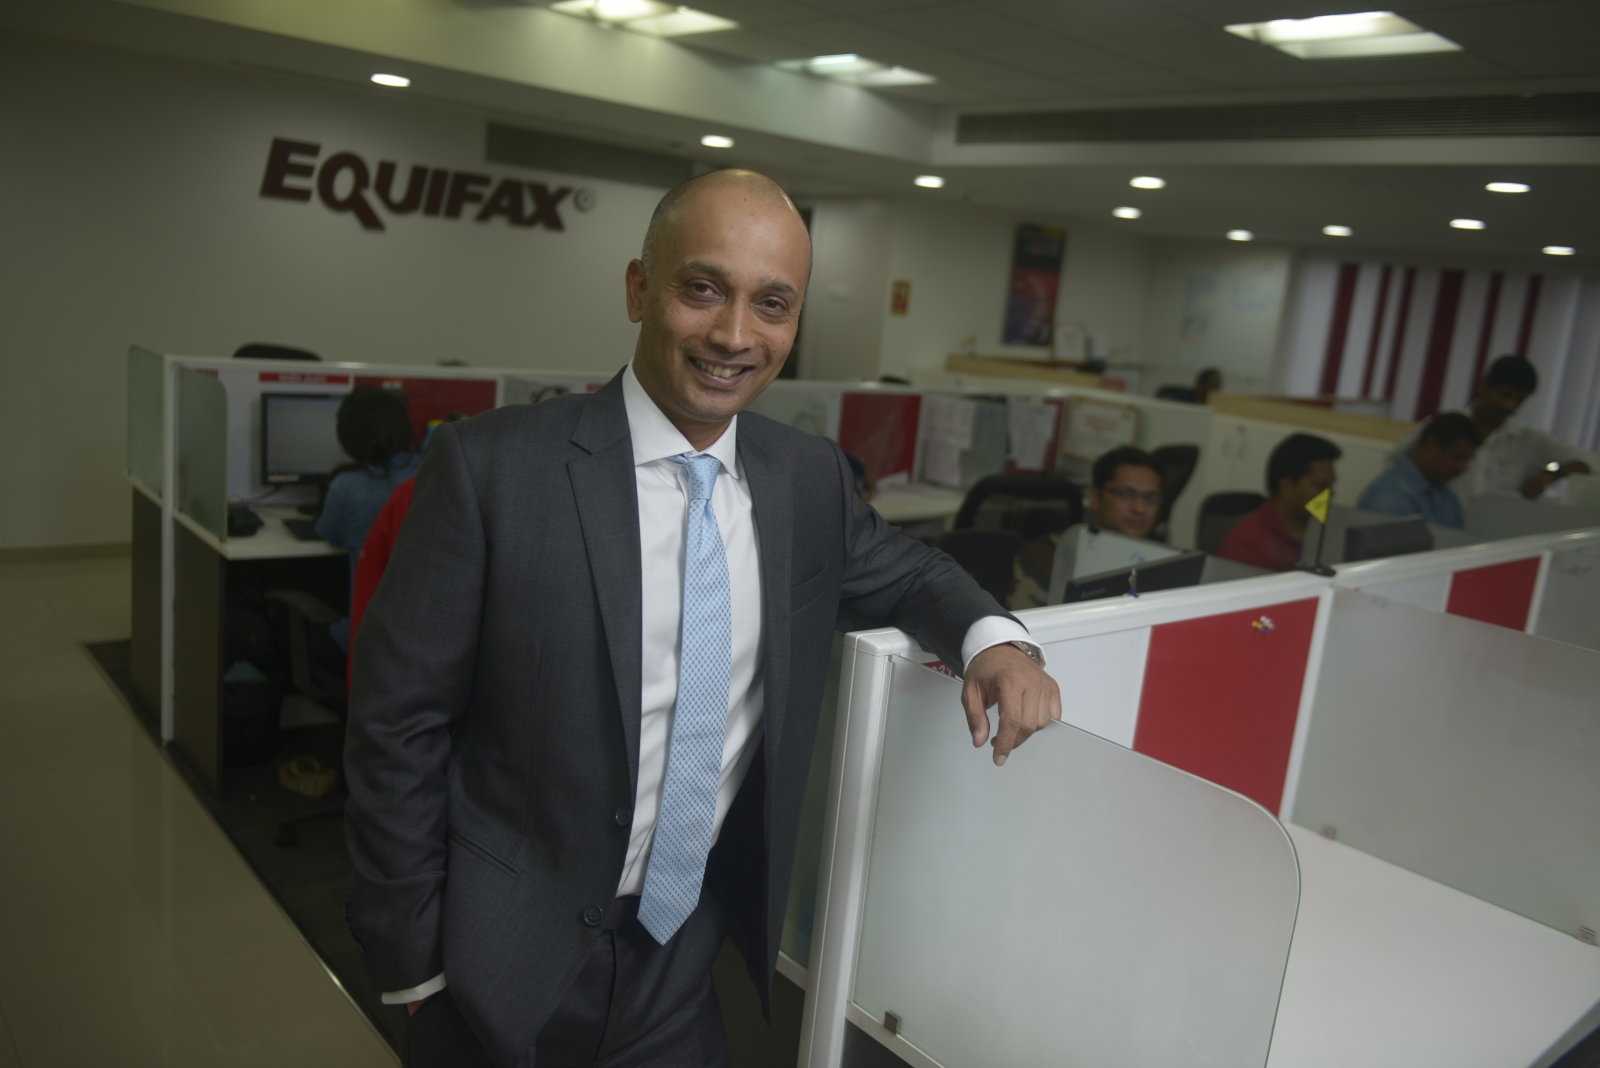 Equifax waives credit freeze fees after facing backlash | DeviceDaily.com